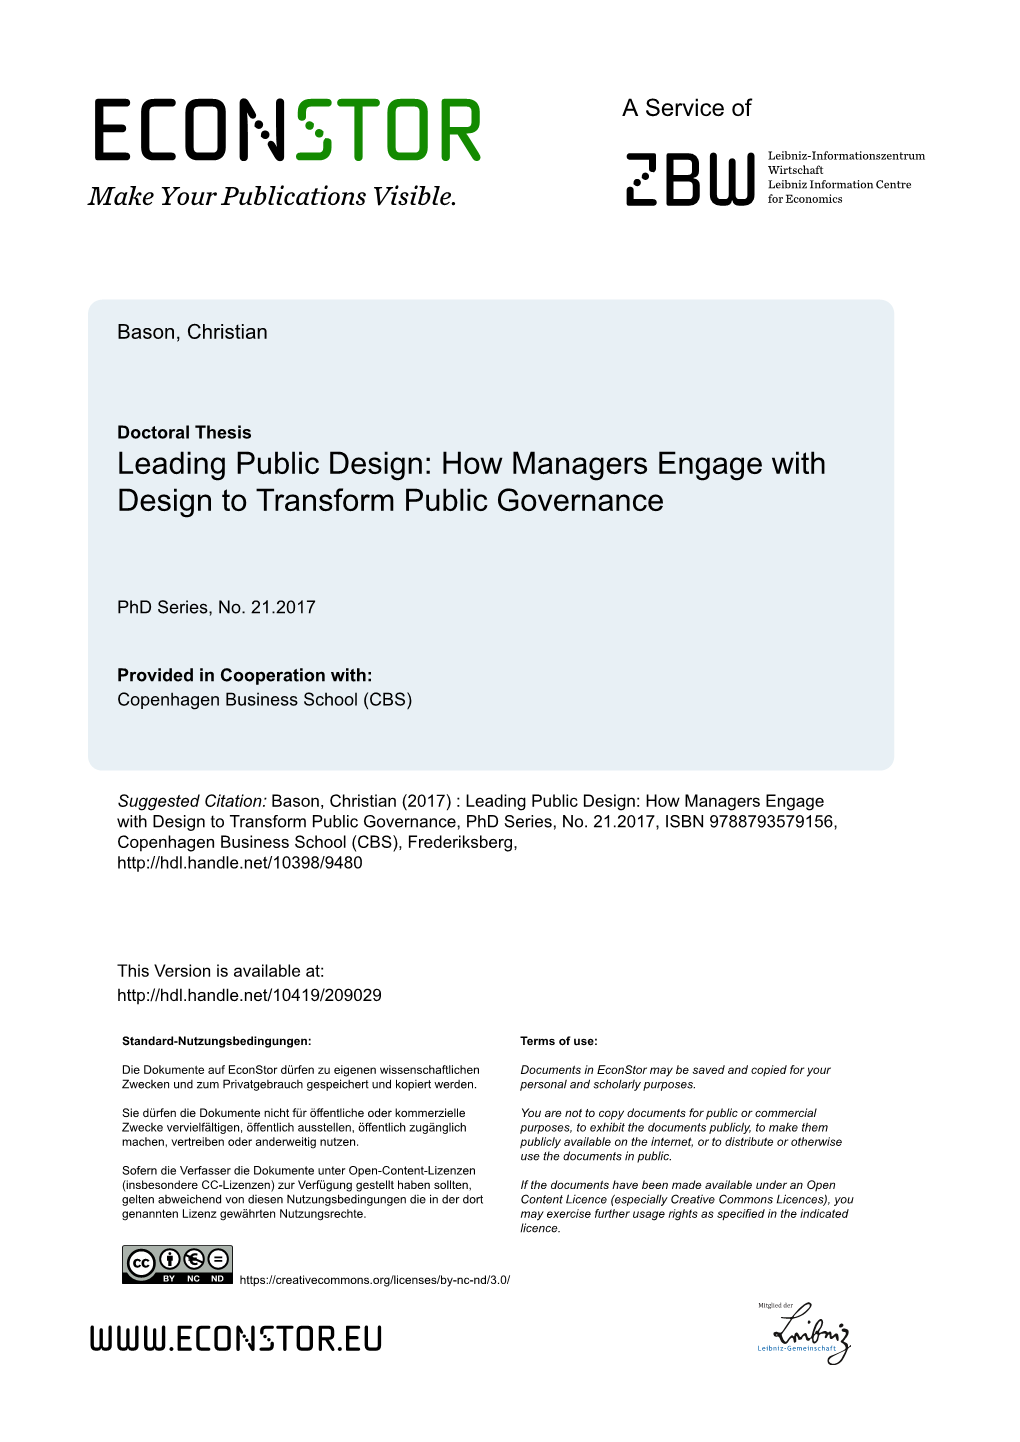 How Managers Engage with Design to Transform Public Governance